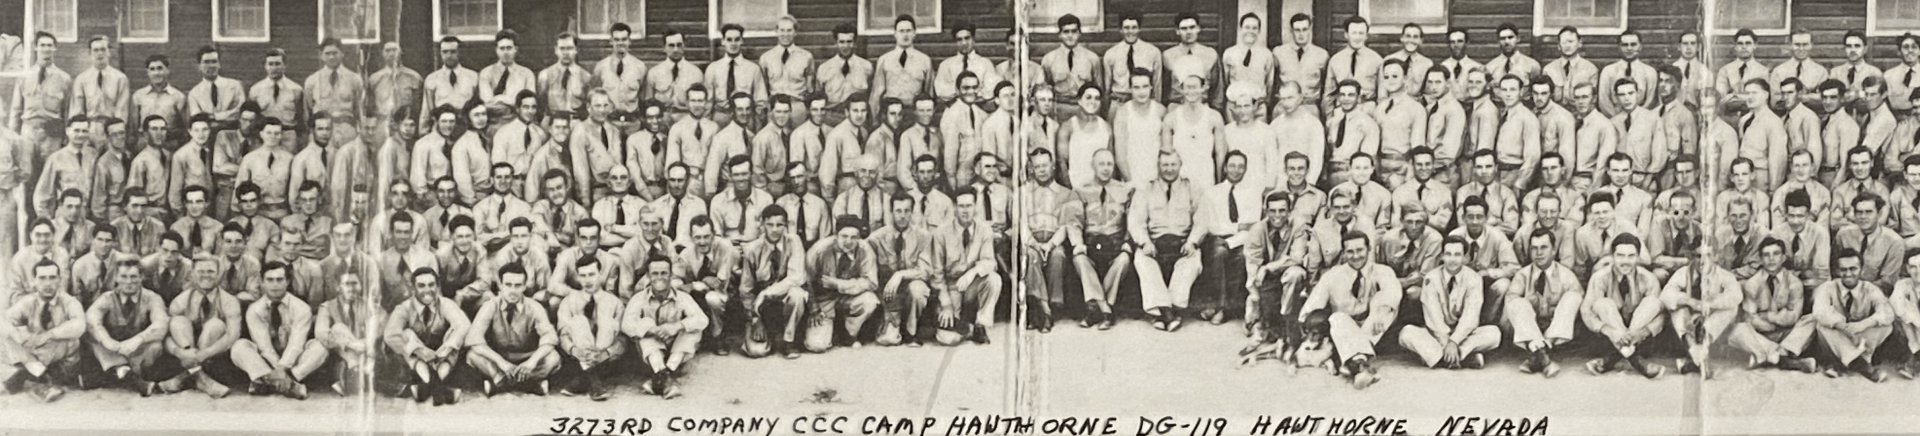 HAWTHORNE CIVILIAN CONSERVATION CORPS (CCC) BUILDS ROADS AND RESERVOIRS TO BRING WATER TO HAWTHORNE, NEVADA